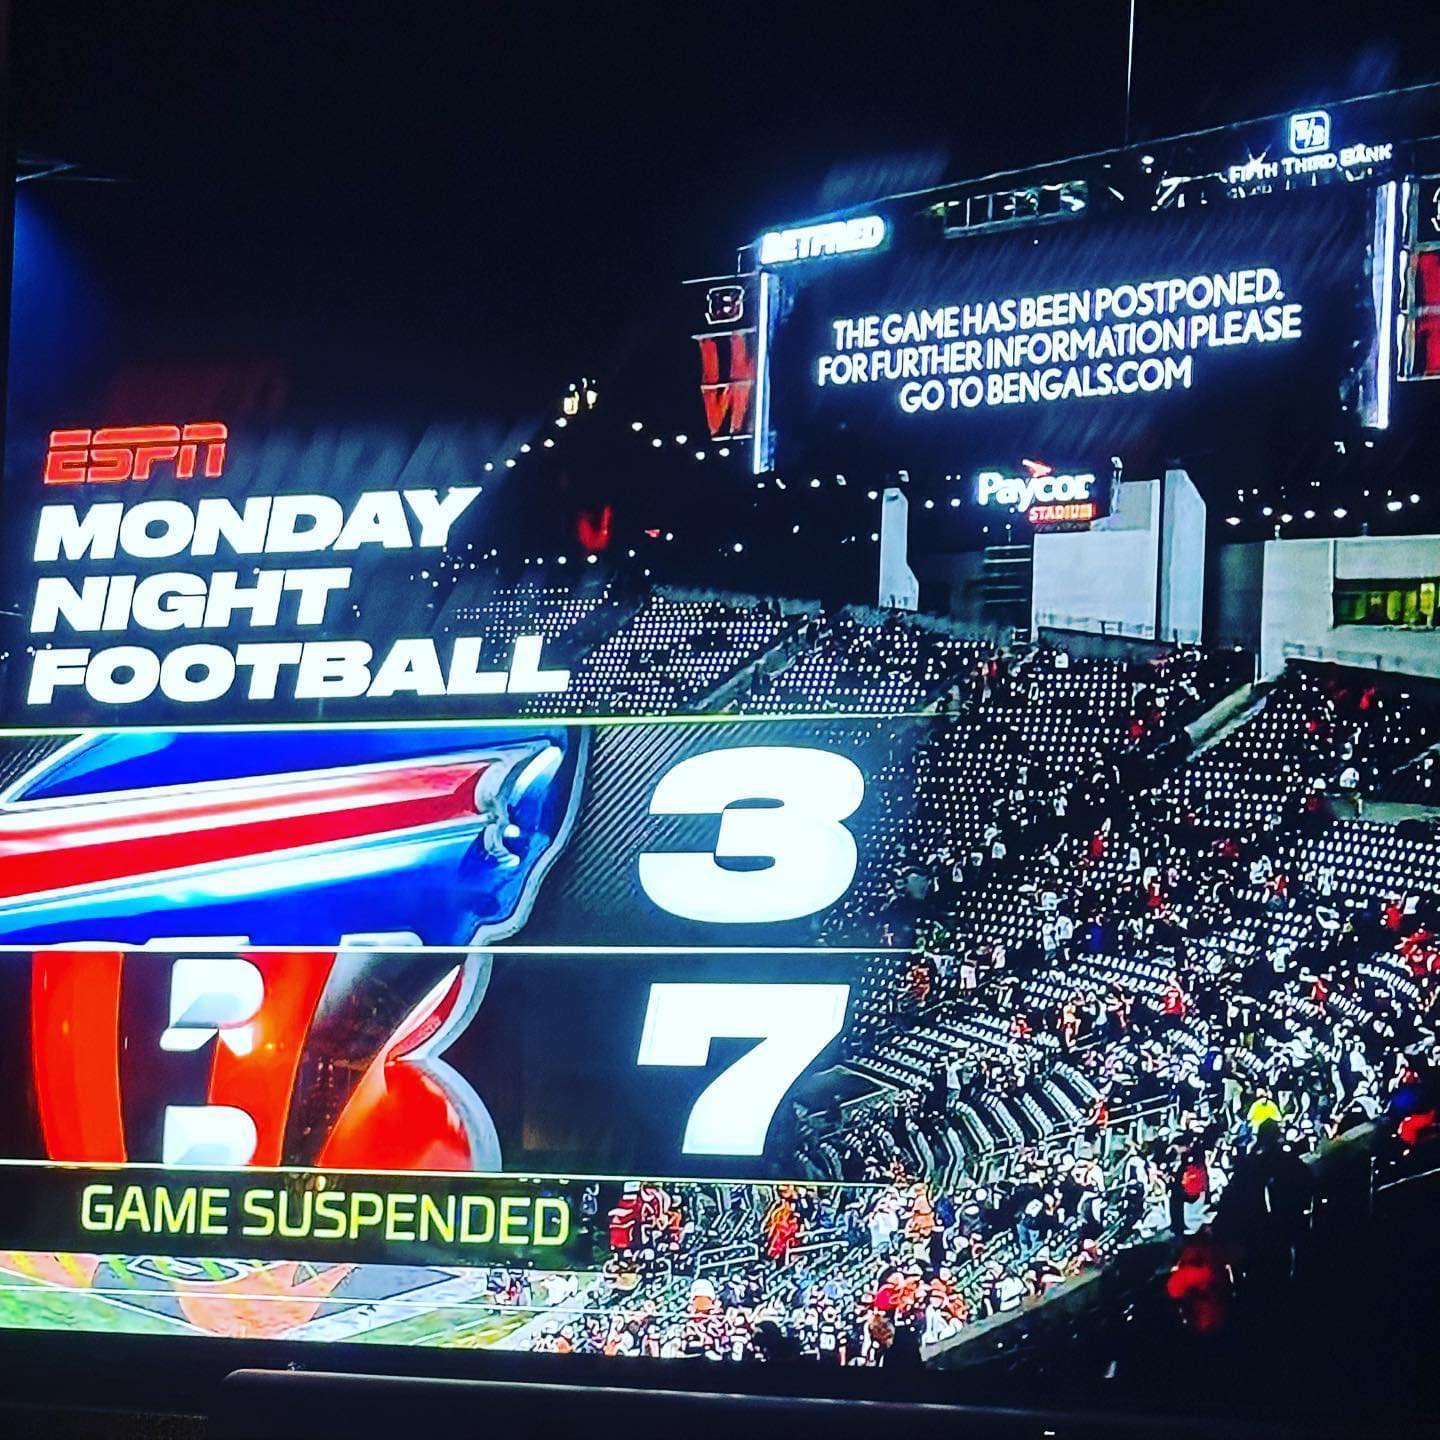 Monday night football game suspended